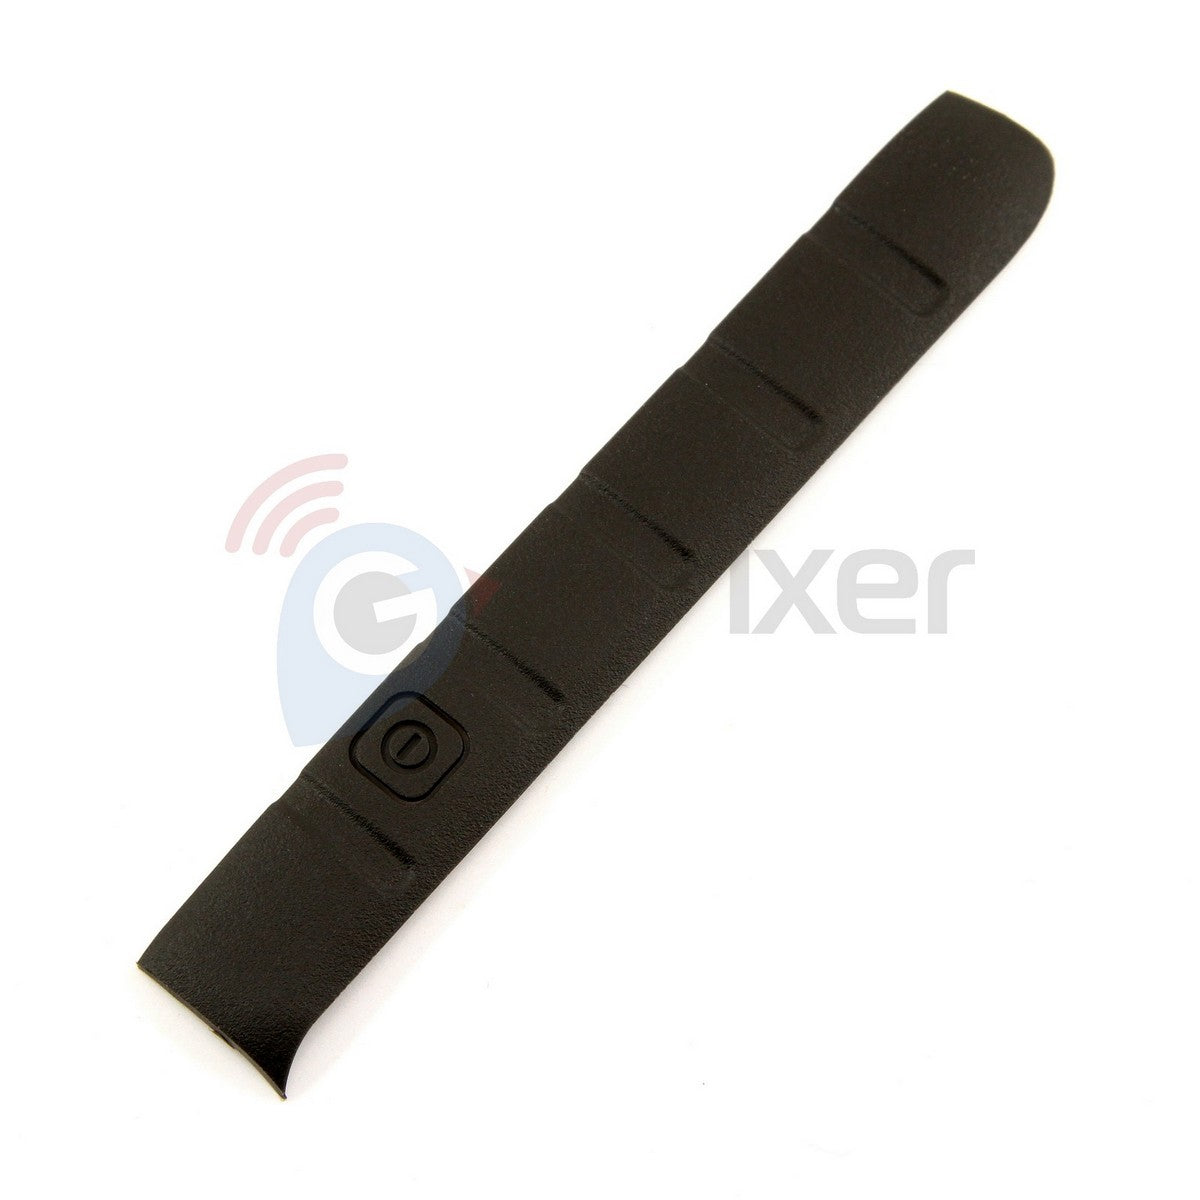 Rubber buttons (right side) for Garmin eTrex Rino 650, 650t, 655t part